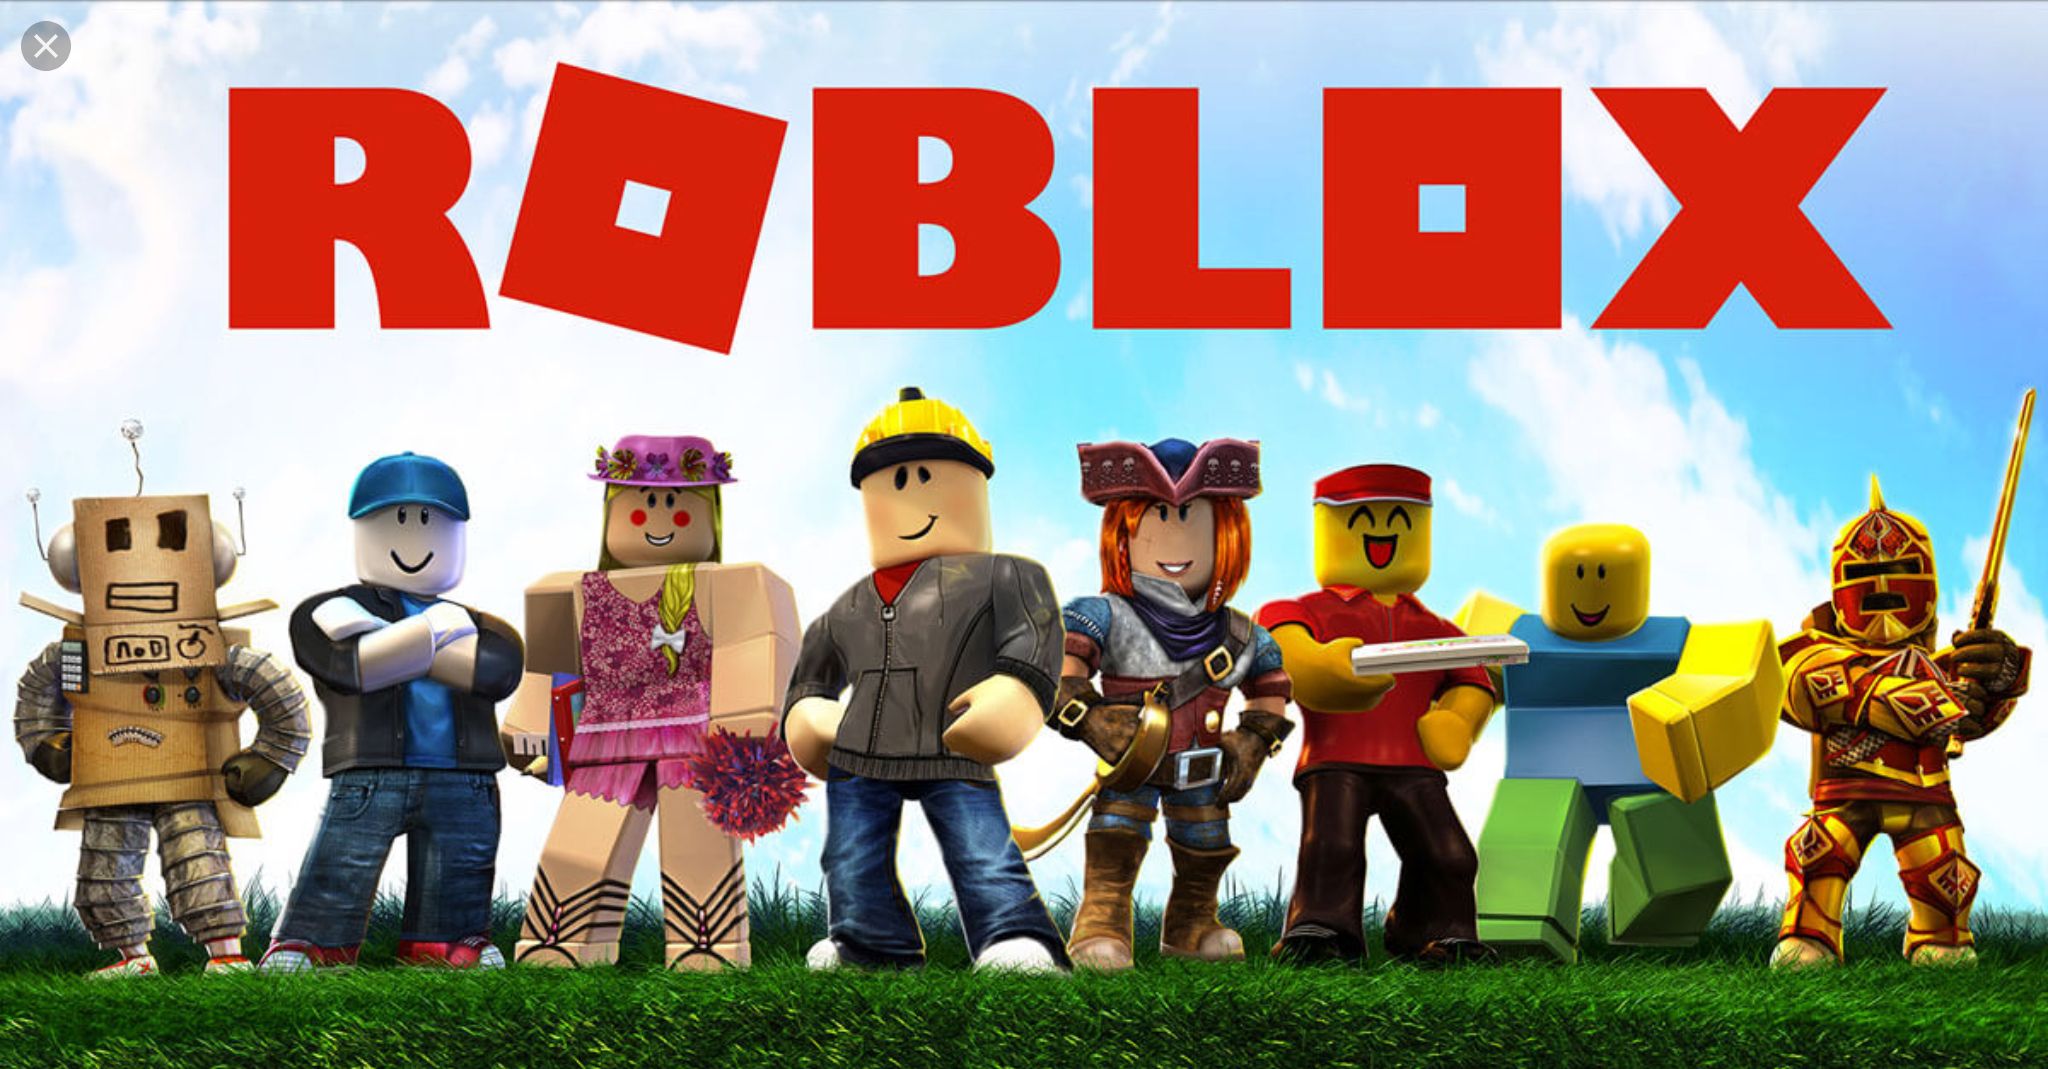 Download Roblox Wallpapers